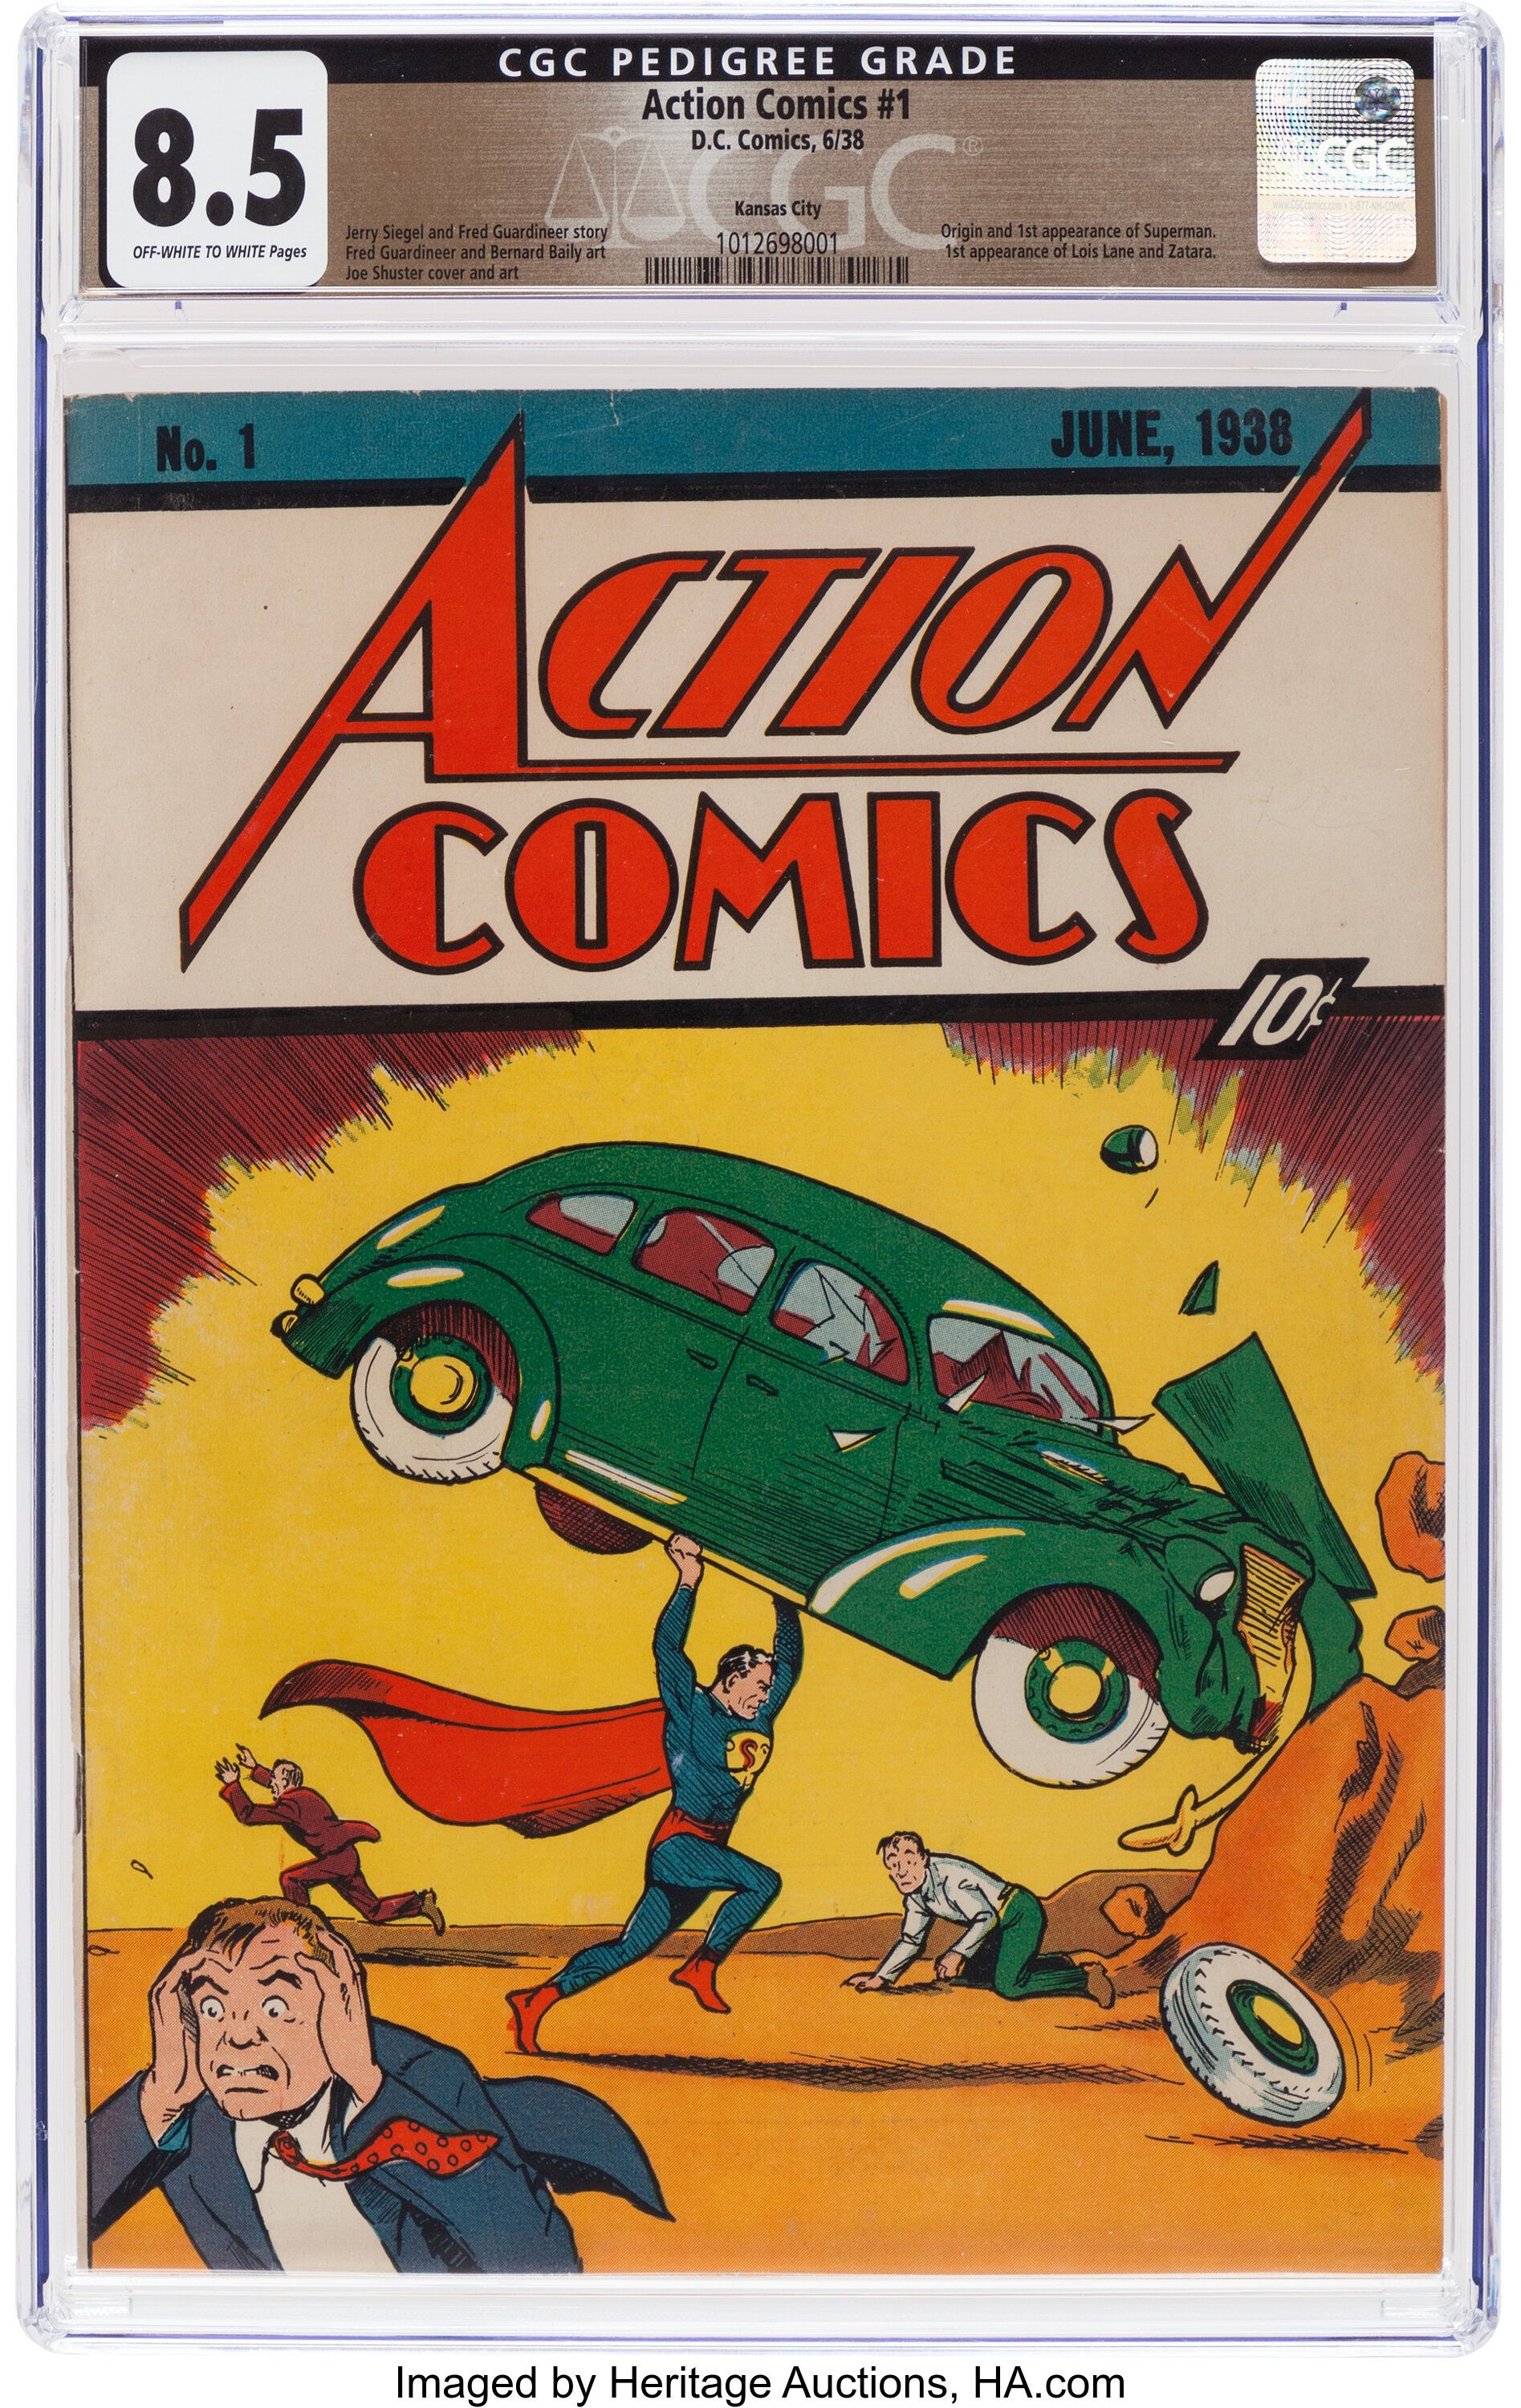 The graded copy of Action #1